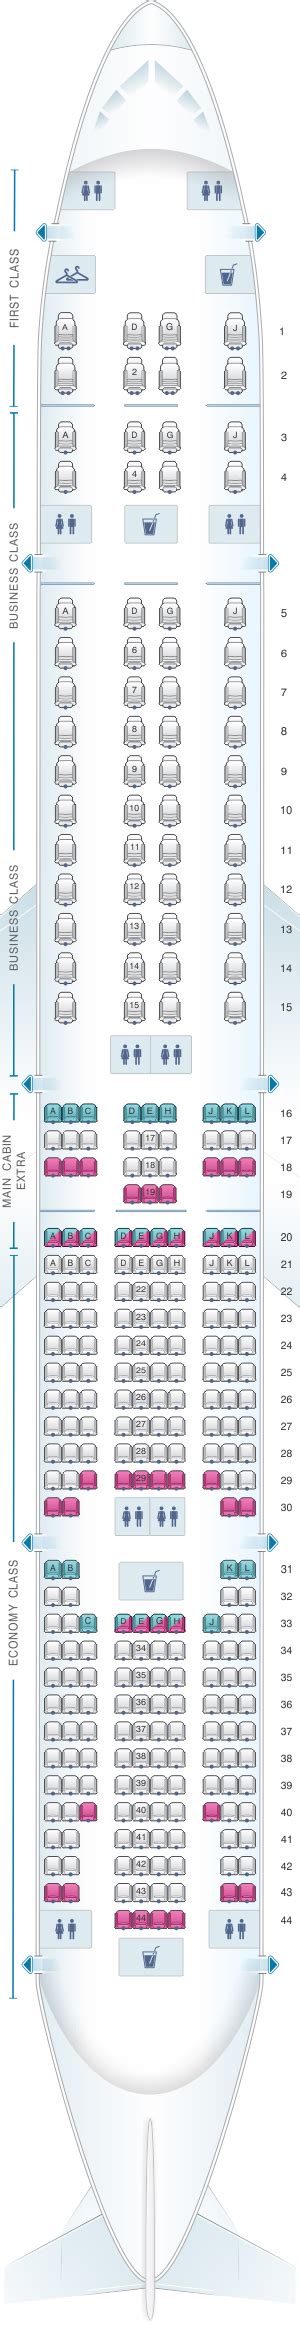 American Airlines Airline Seating Charts Two Birds Home